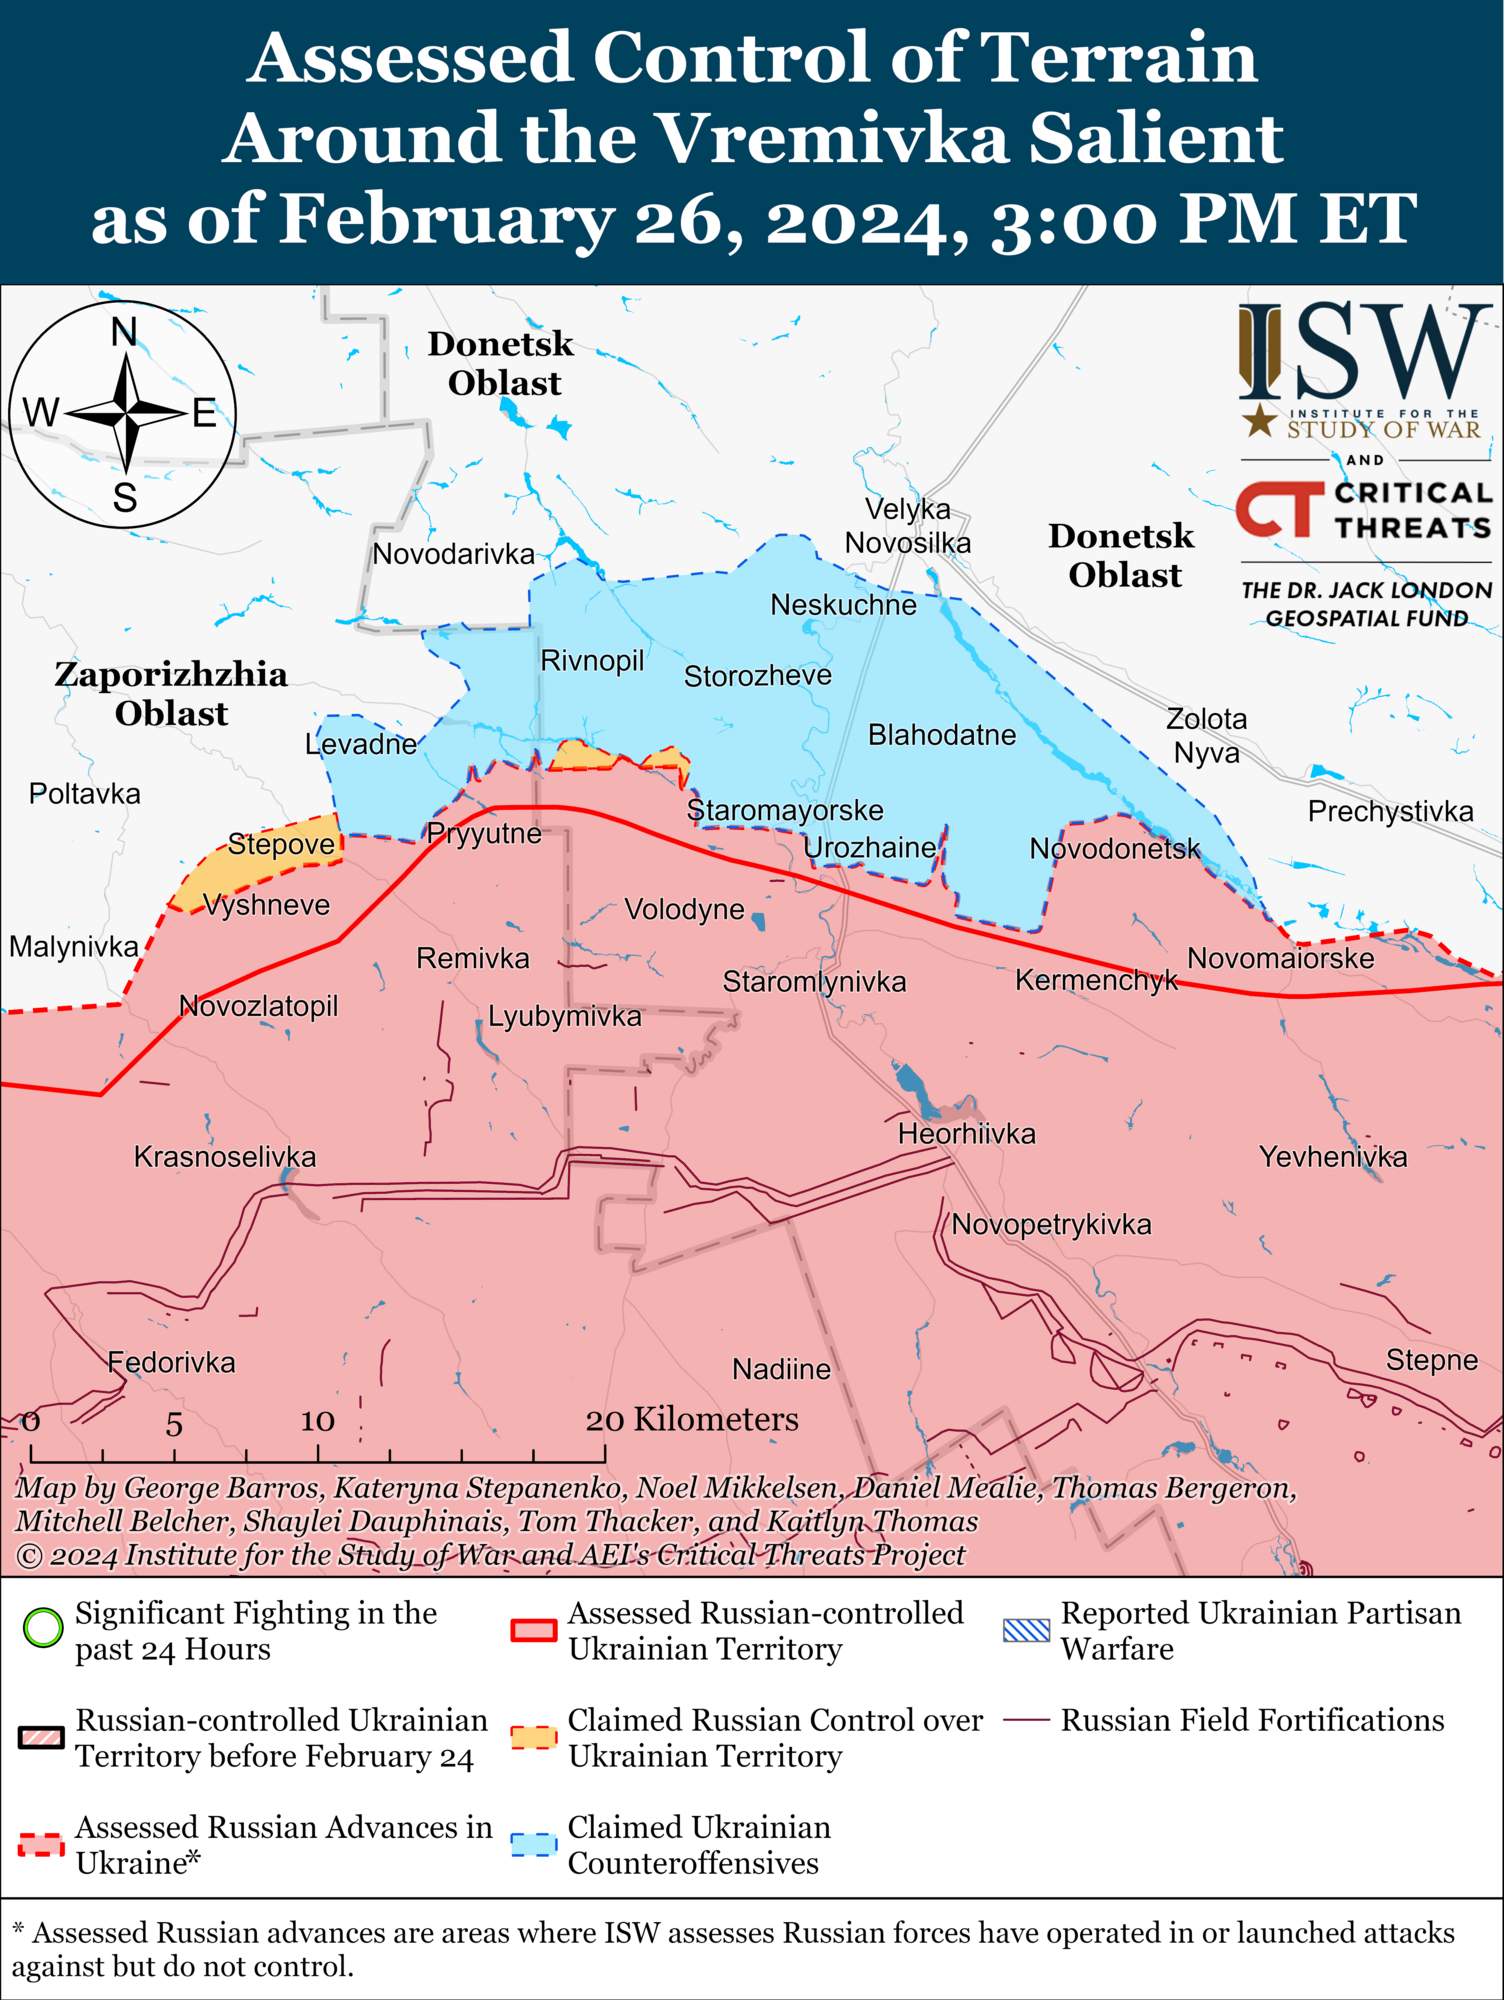 Russia is preparing a new offensive in Ukraine, but the Ukrainian Armed Forces can challenge the Russian initiative under one condition - ISW